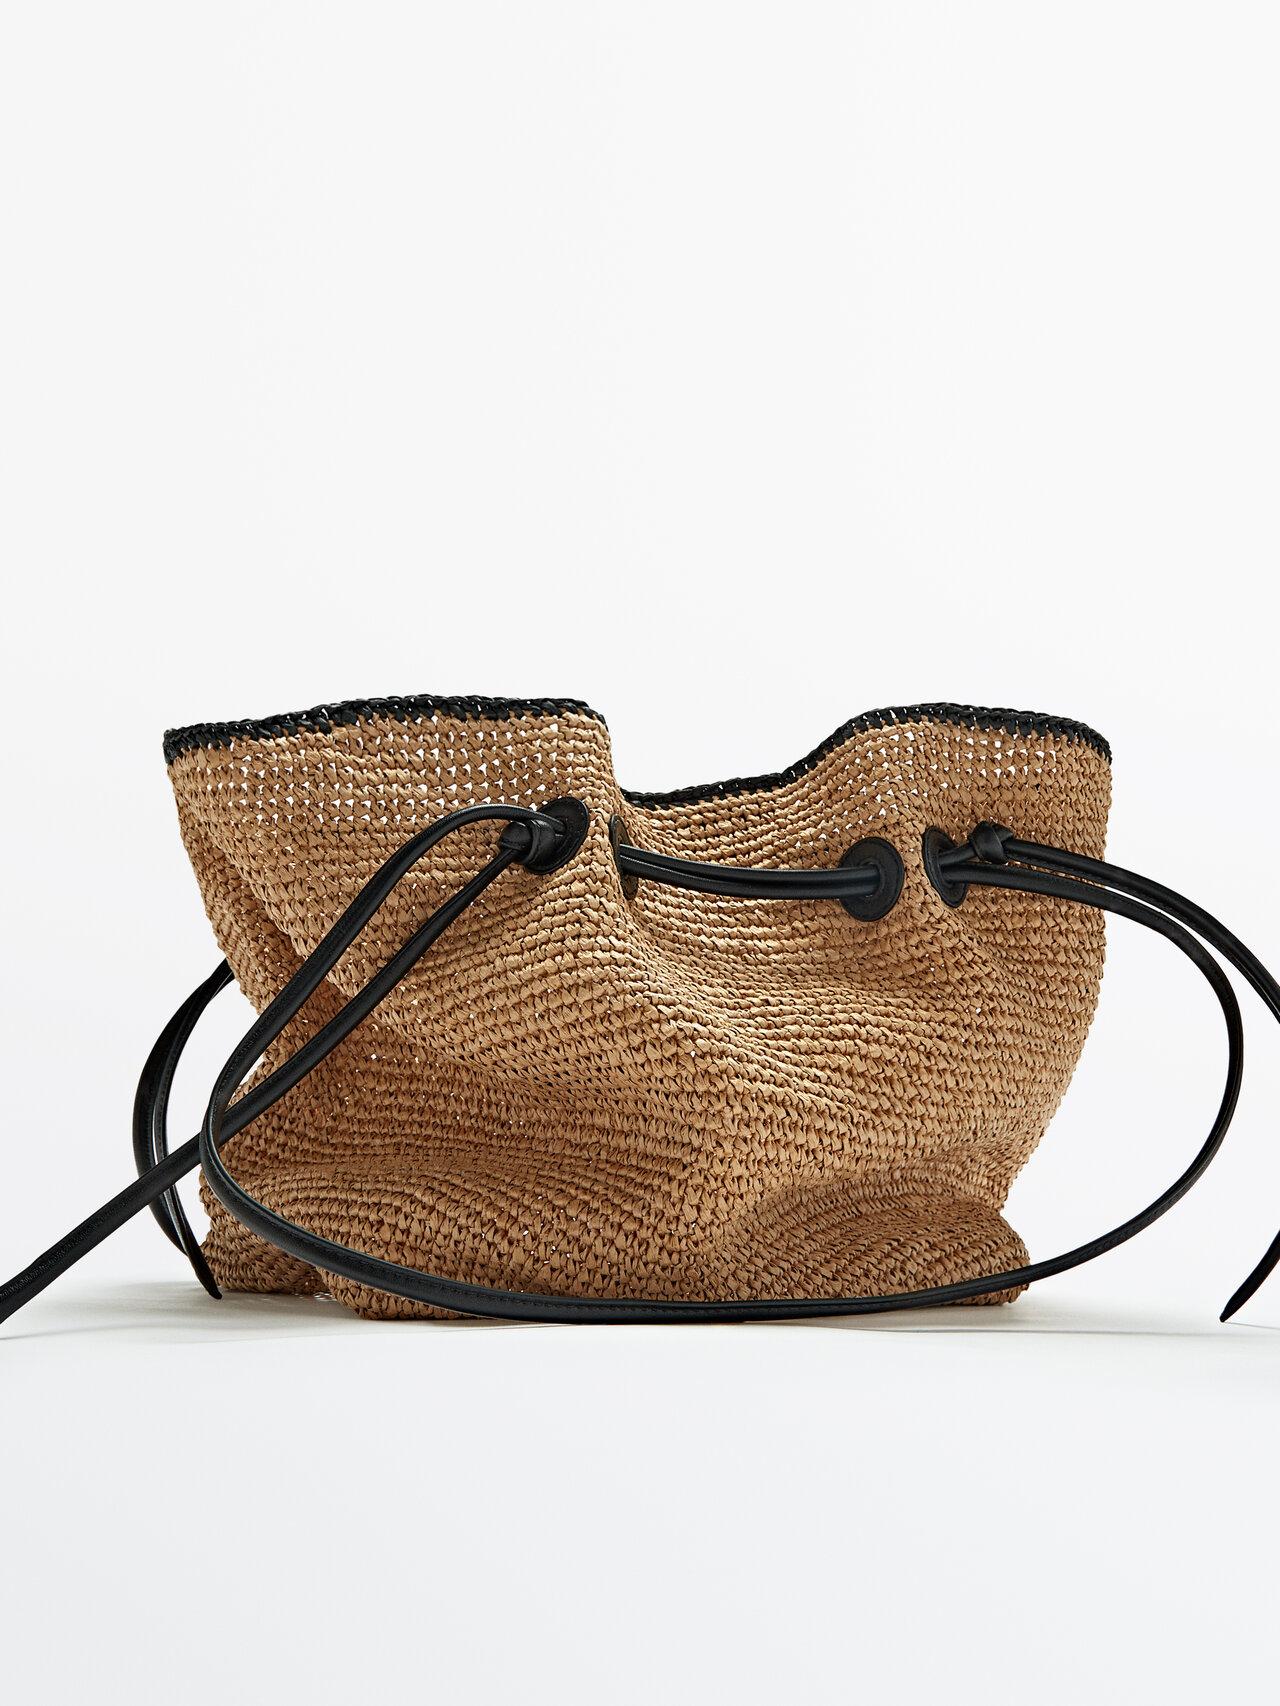 MASSIMO DUTTI Floral Raffia Tote Bag With Leather Handles in Natural | Lyst